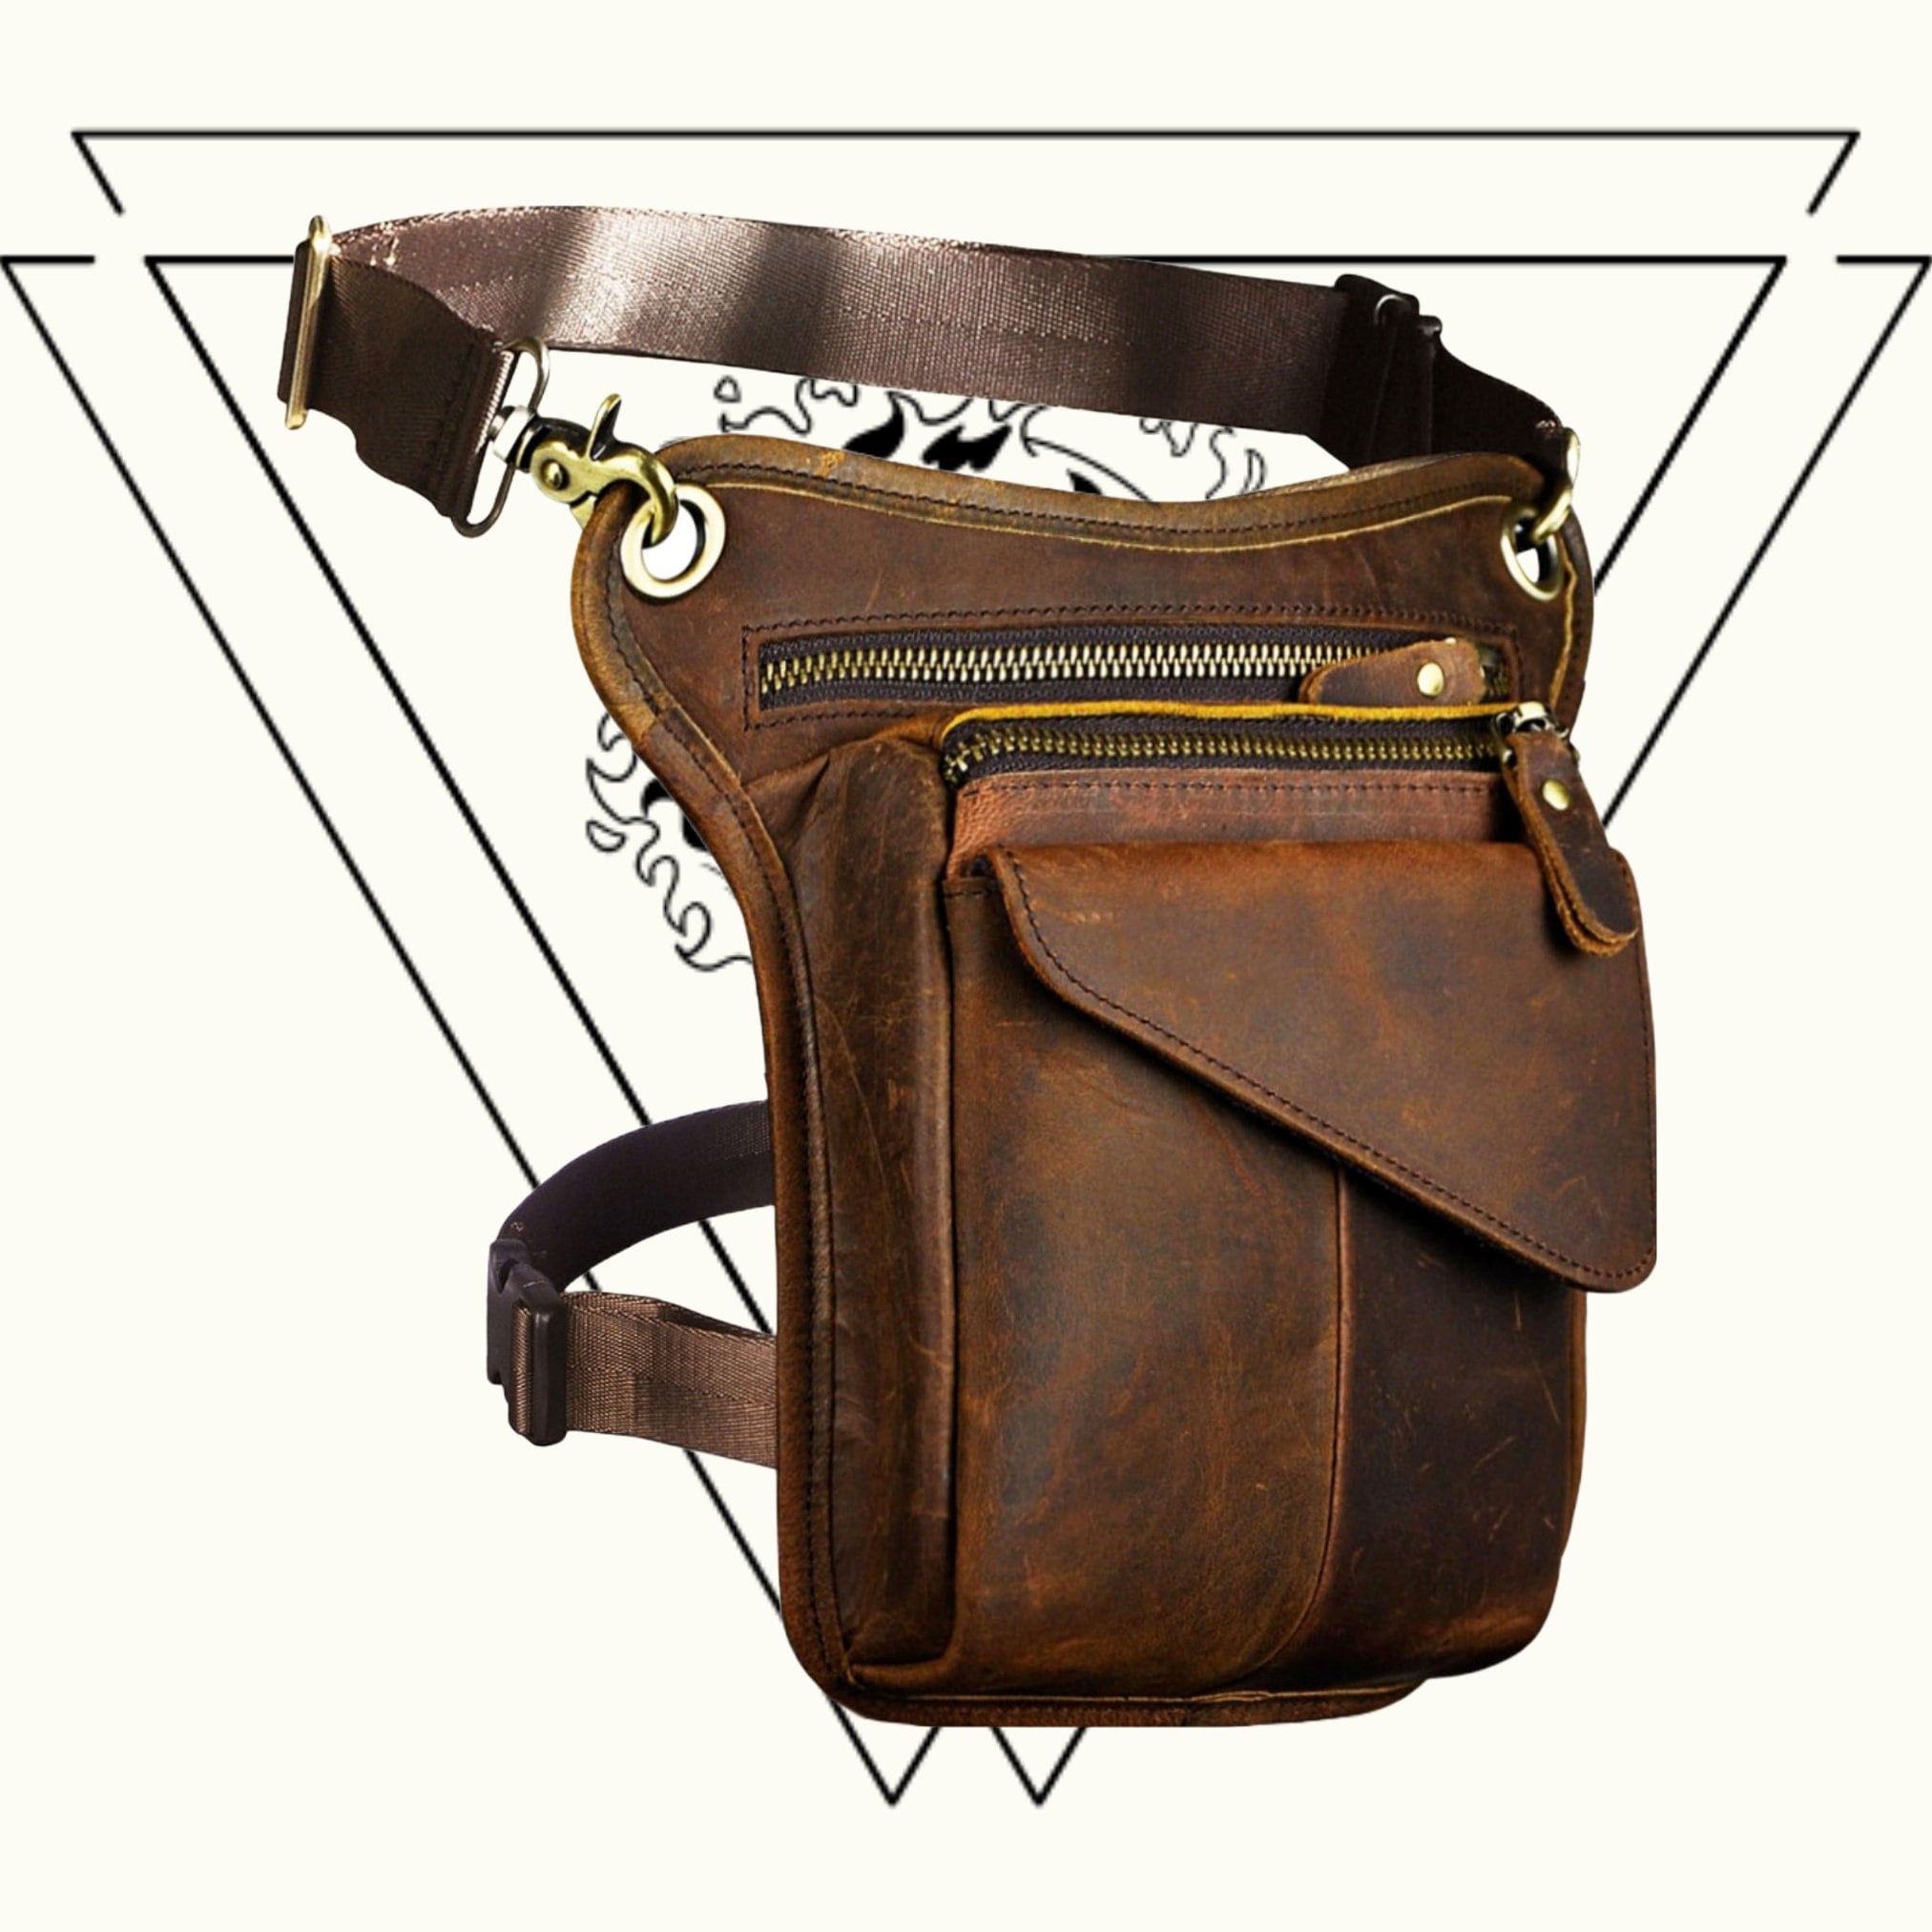 DK86 Genuine Leather Motorcycle Waist Pack Thigh Drop Leg Bag for Men and Women Vintage Brown 